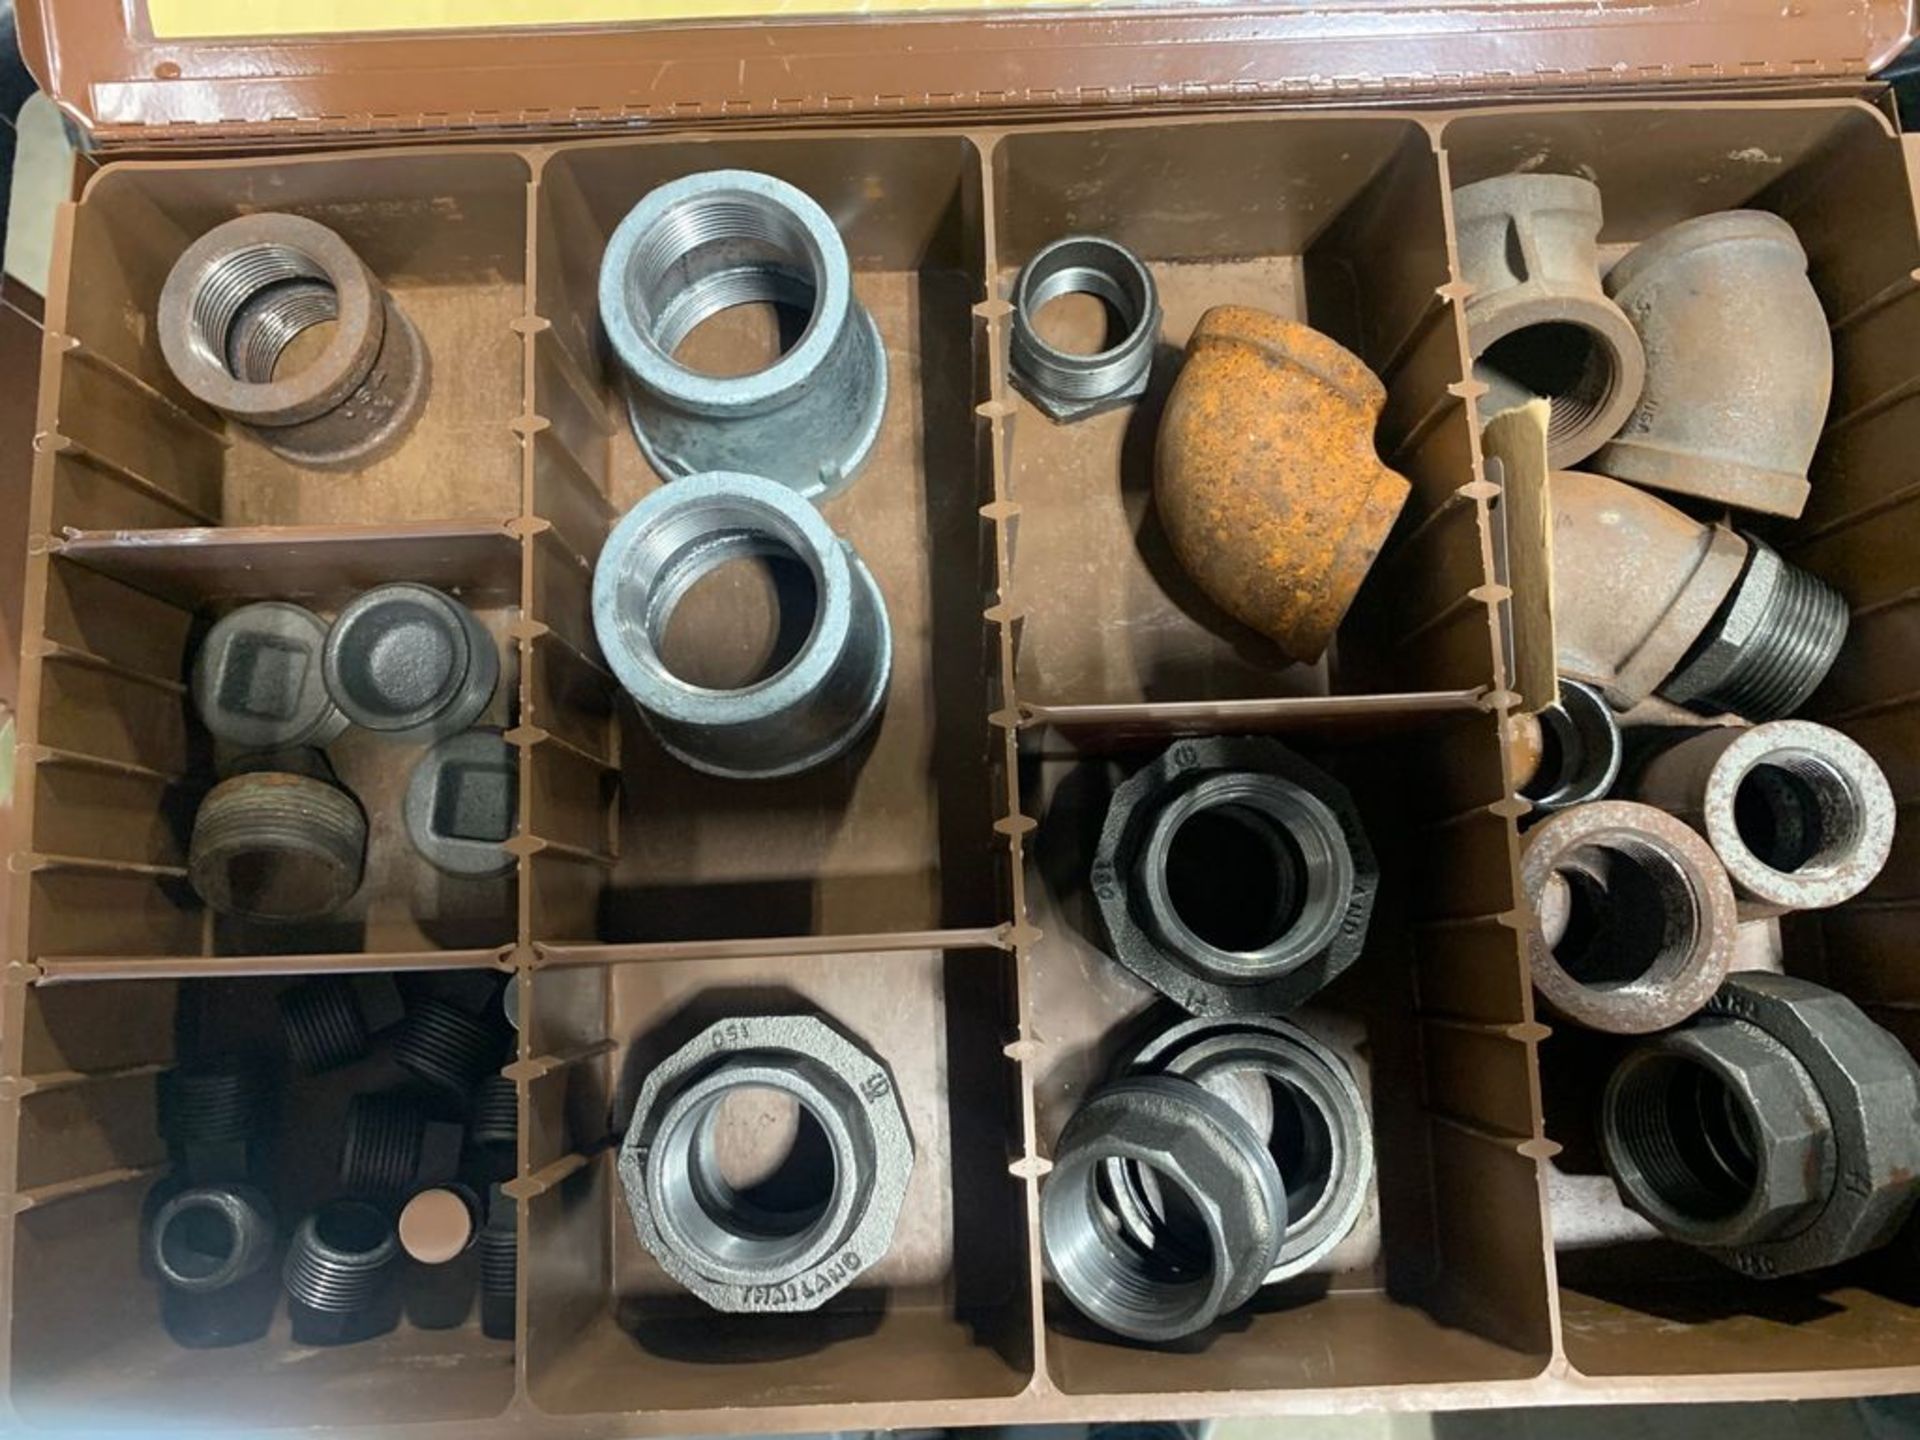 LAWSON PRODUCTS IRON PIPE FITTINGS / ENTIRE CONTENTS OF CASE INCLUDED LOT 16 - Image 3 of 4